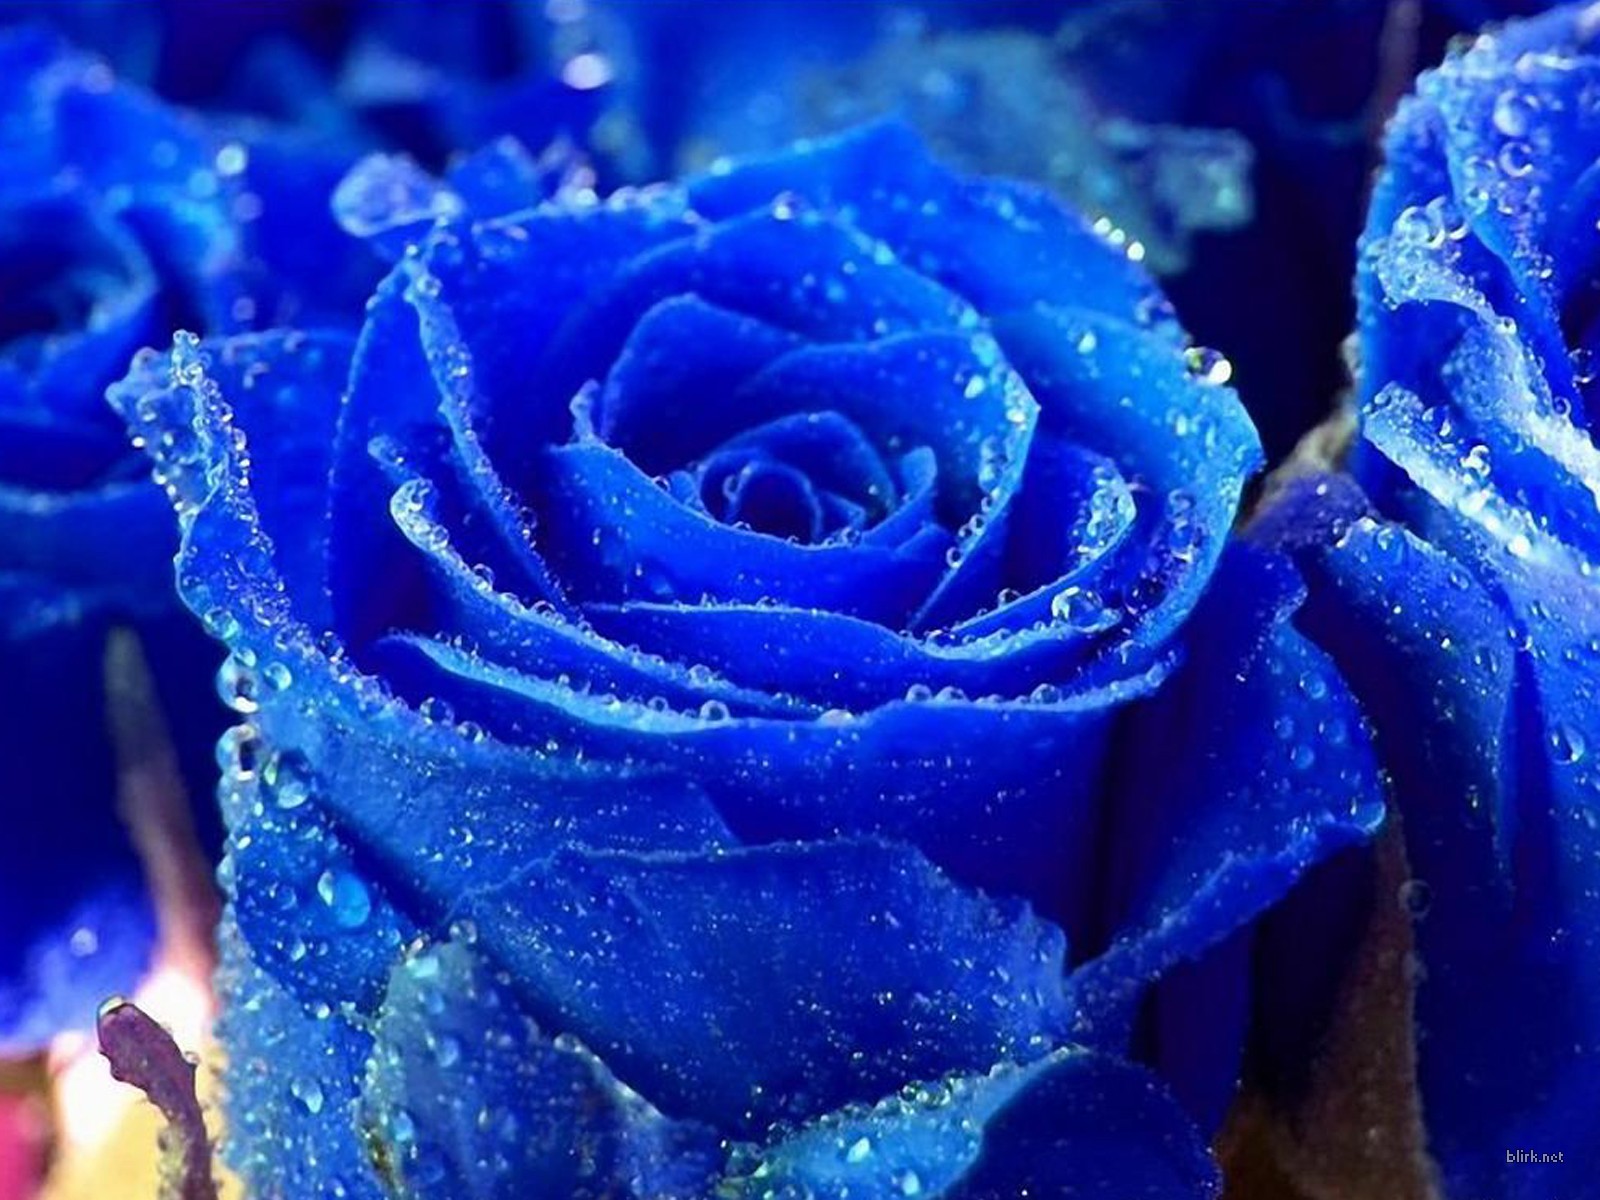 Free Download Blue Roses Wallpaper Hd Tumblr For Walls For Mobile Phone Widescreen 1600x10 For Your Desktop Mobile Tablet Explore 47 Blue Floral Wallpaper For Walls Blue And White